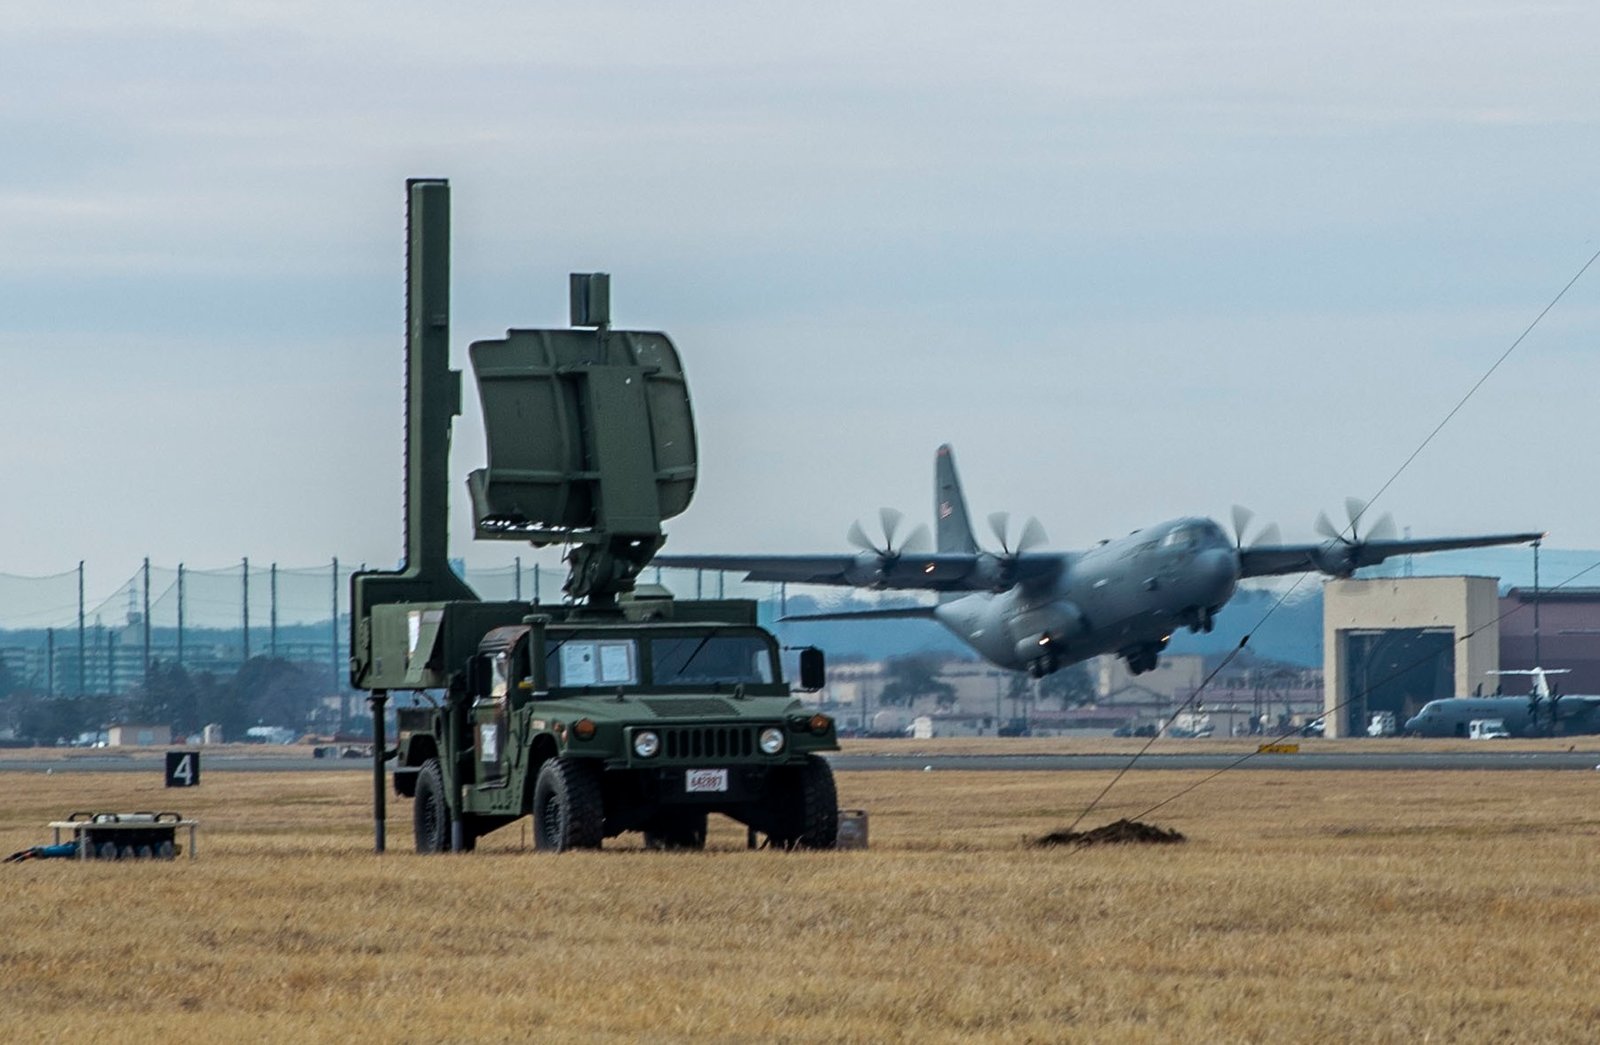 US Air Force receives new mobile ATC system